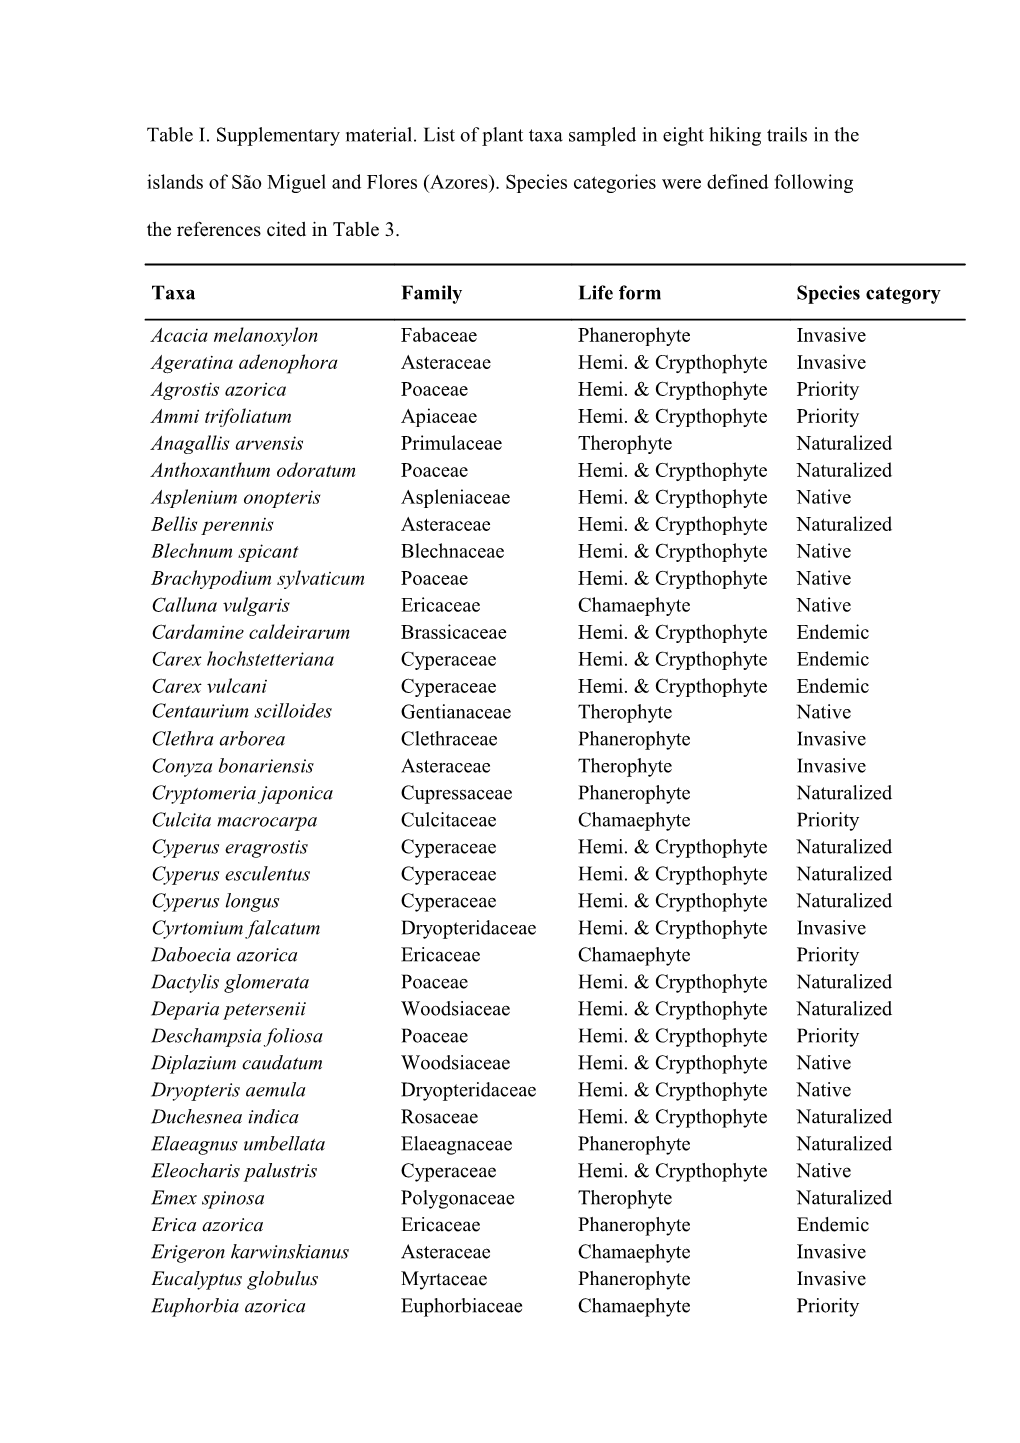 Table I. Supplementary Material. List of Plant Taxa Sampled in Eight Hiking Trails in The